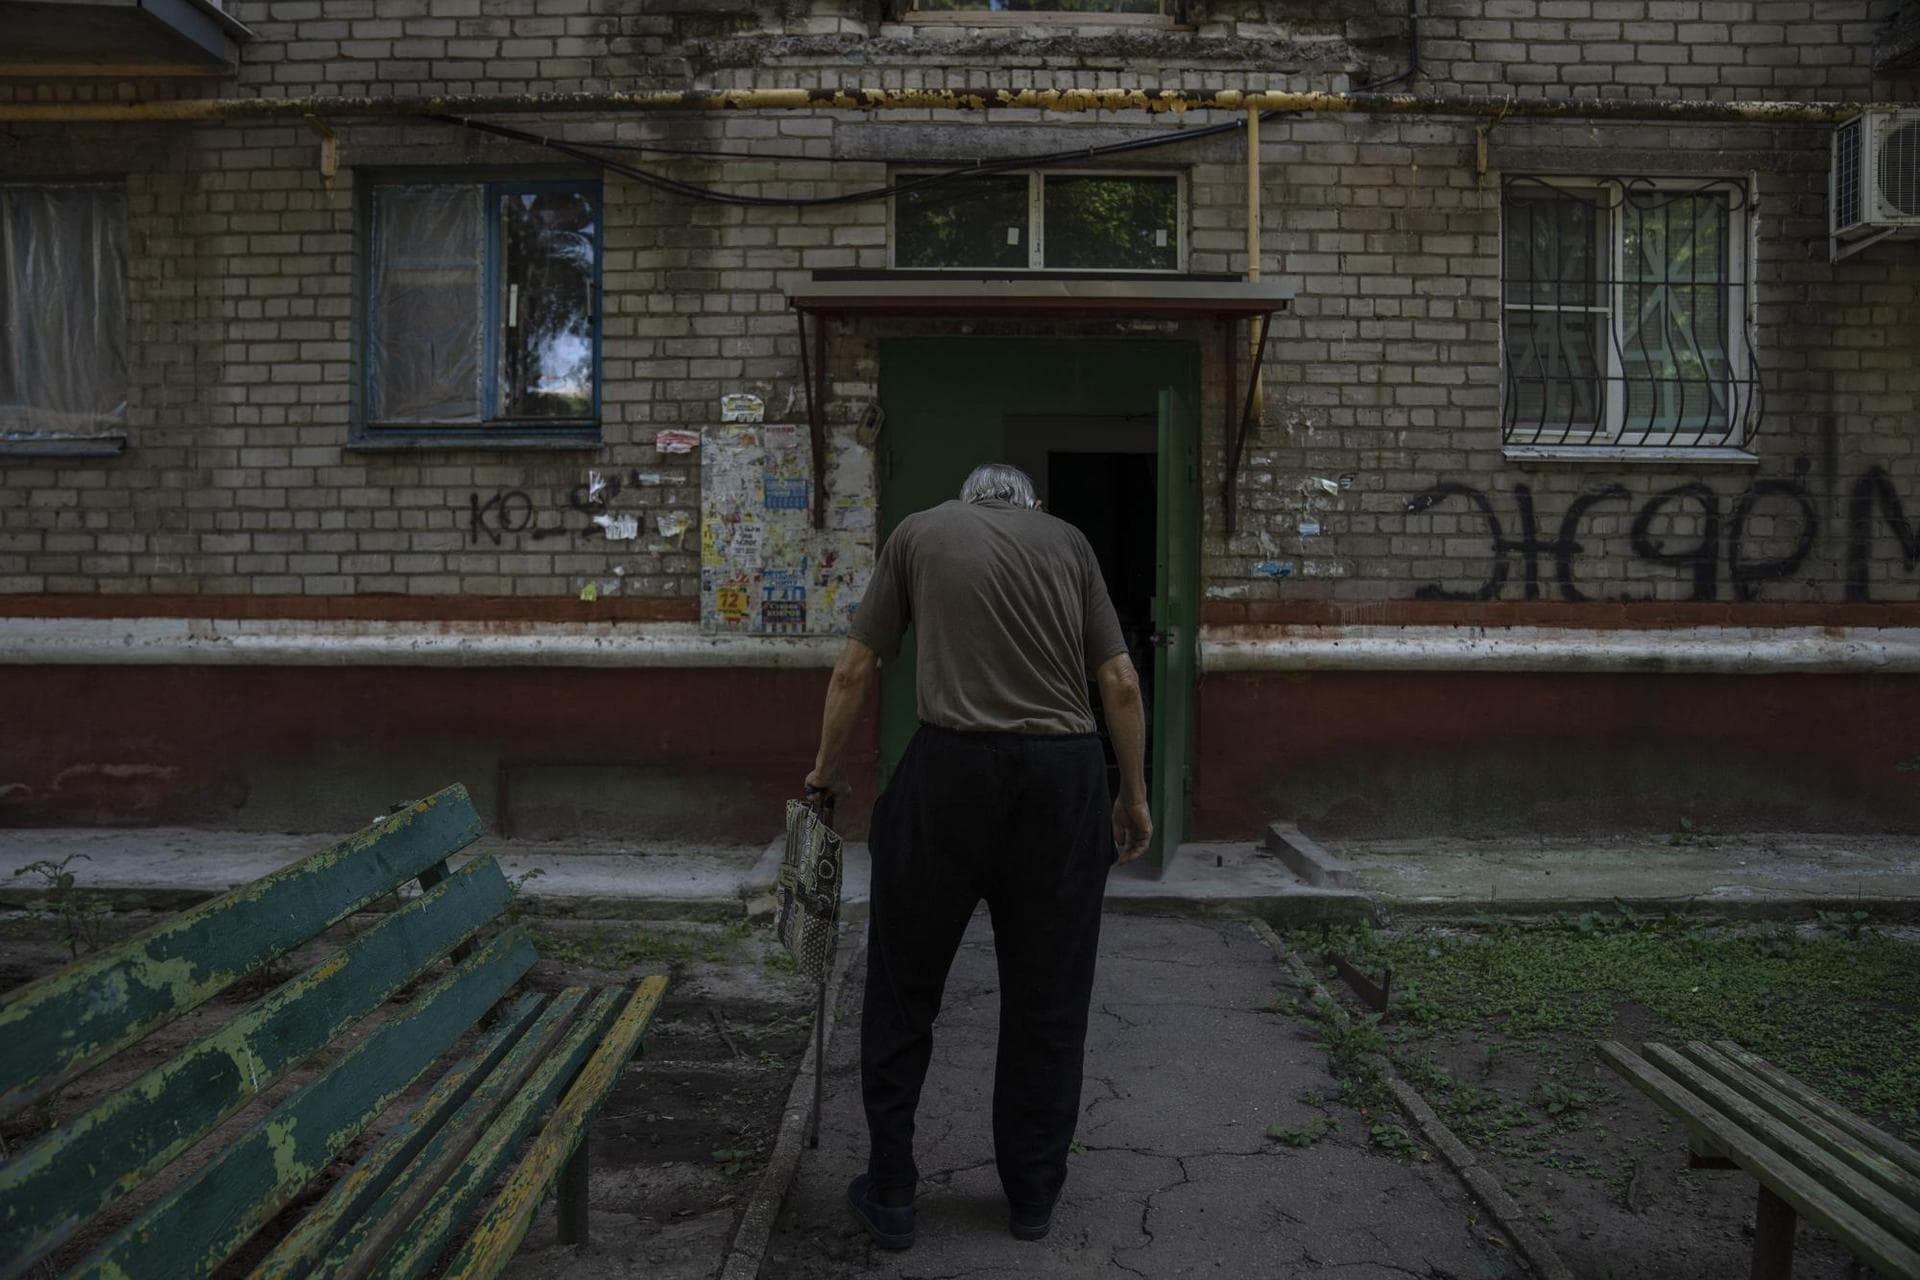 Seventy-year-old pensioner Valerii Ilchenko, who lives alone and is refusing to evacuate, walks to his apartment, after filling out his daily crossword, in Kramatorsk